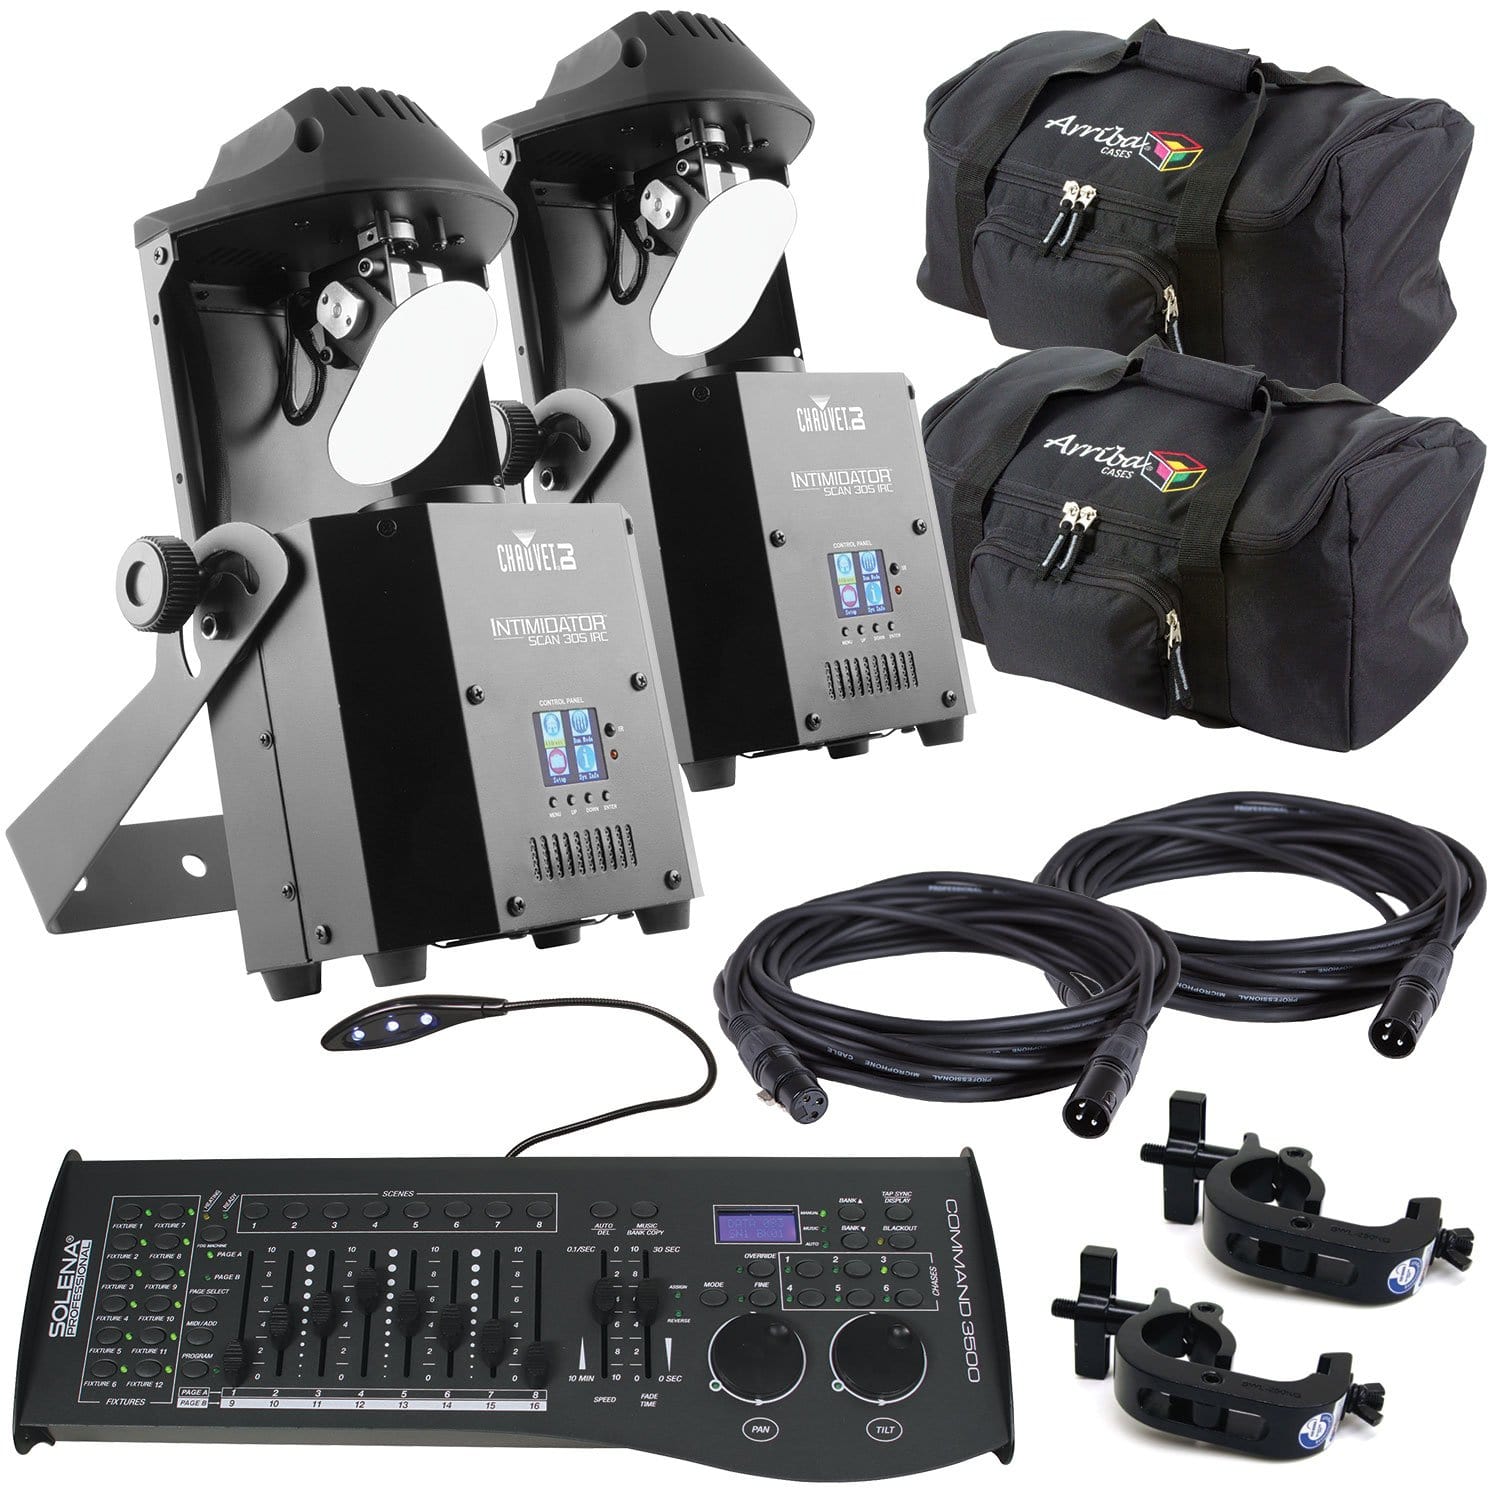 Chauvet Intimidator Scan 305 IRC LED Moving Head Light 2-Pack with Bags - PSSL ProSound and Stage Lighting